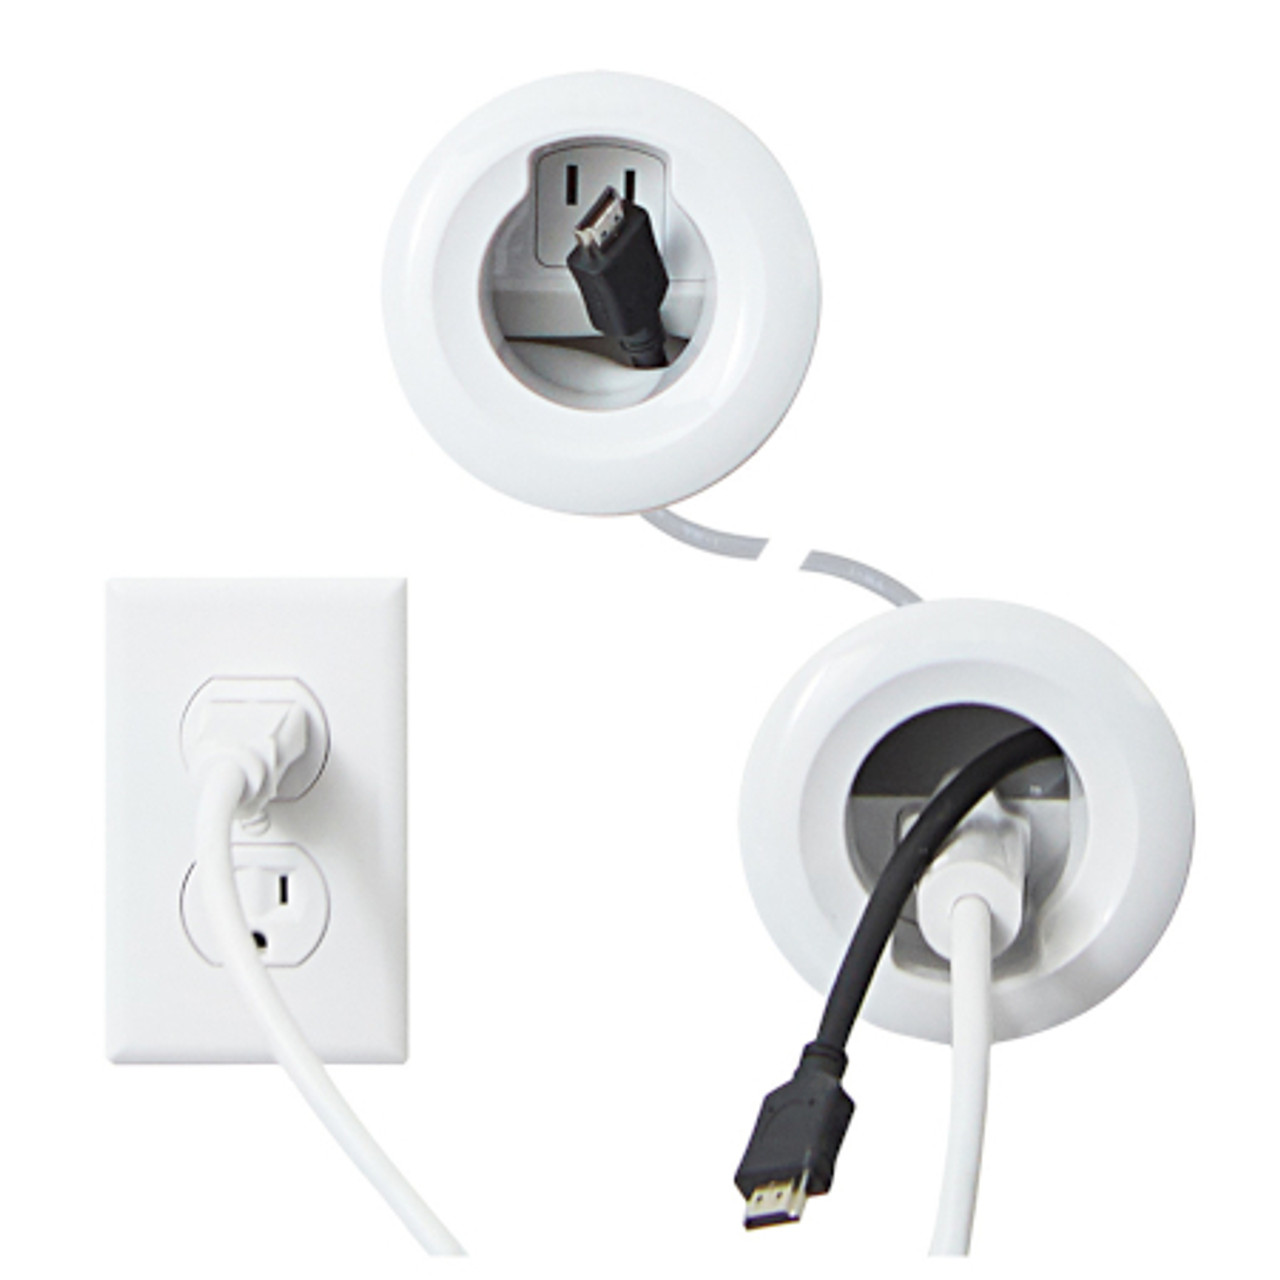 In-Wall Cable Management Kit-Hide TV Power Cables & Low Voltatge Wires  Behind The Wall-Perfect for Wall Mounted TVs